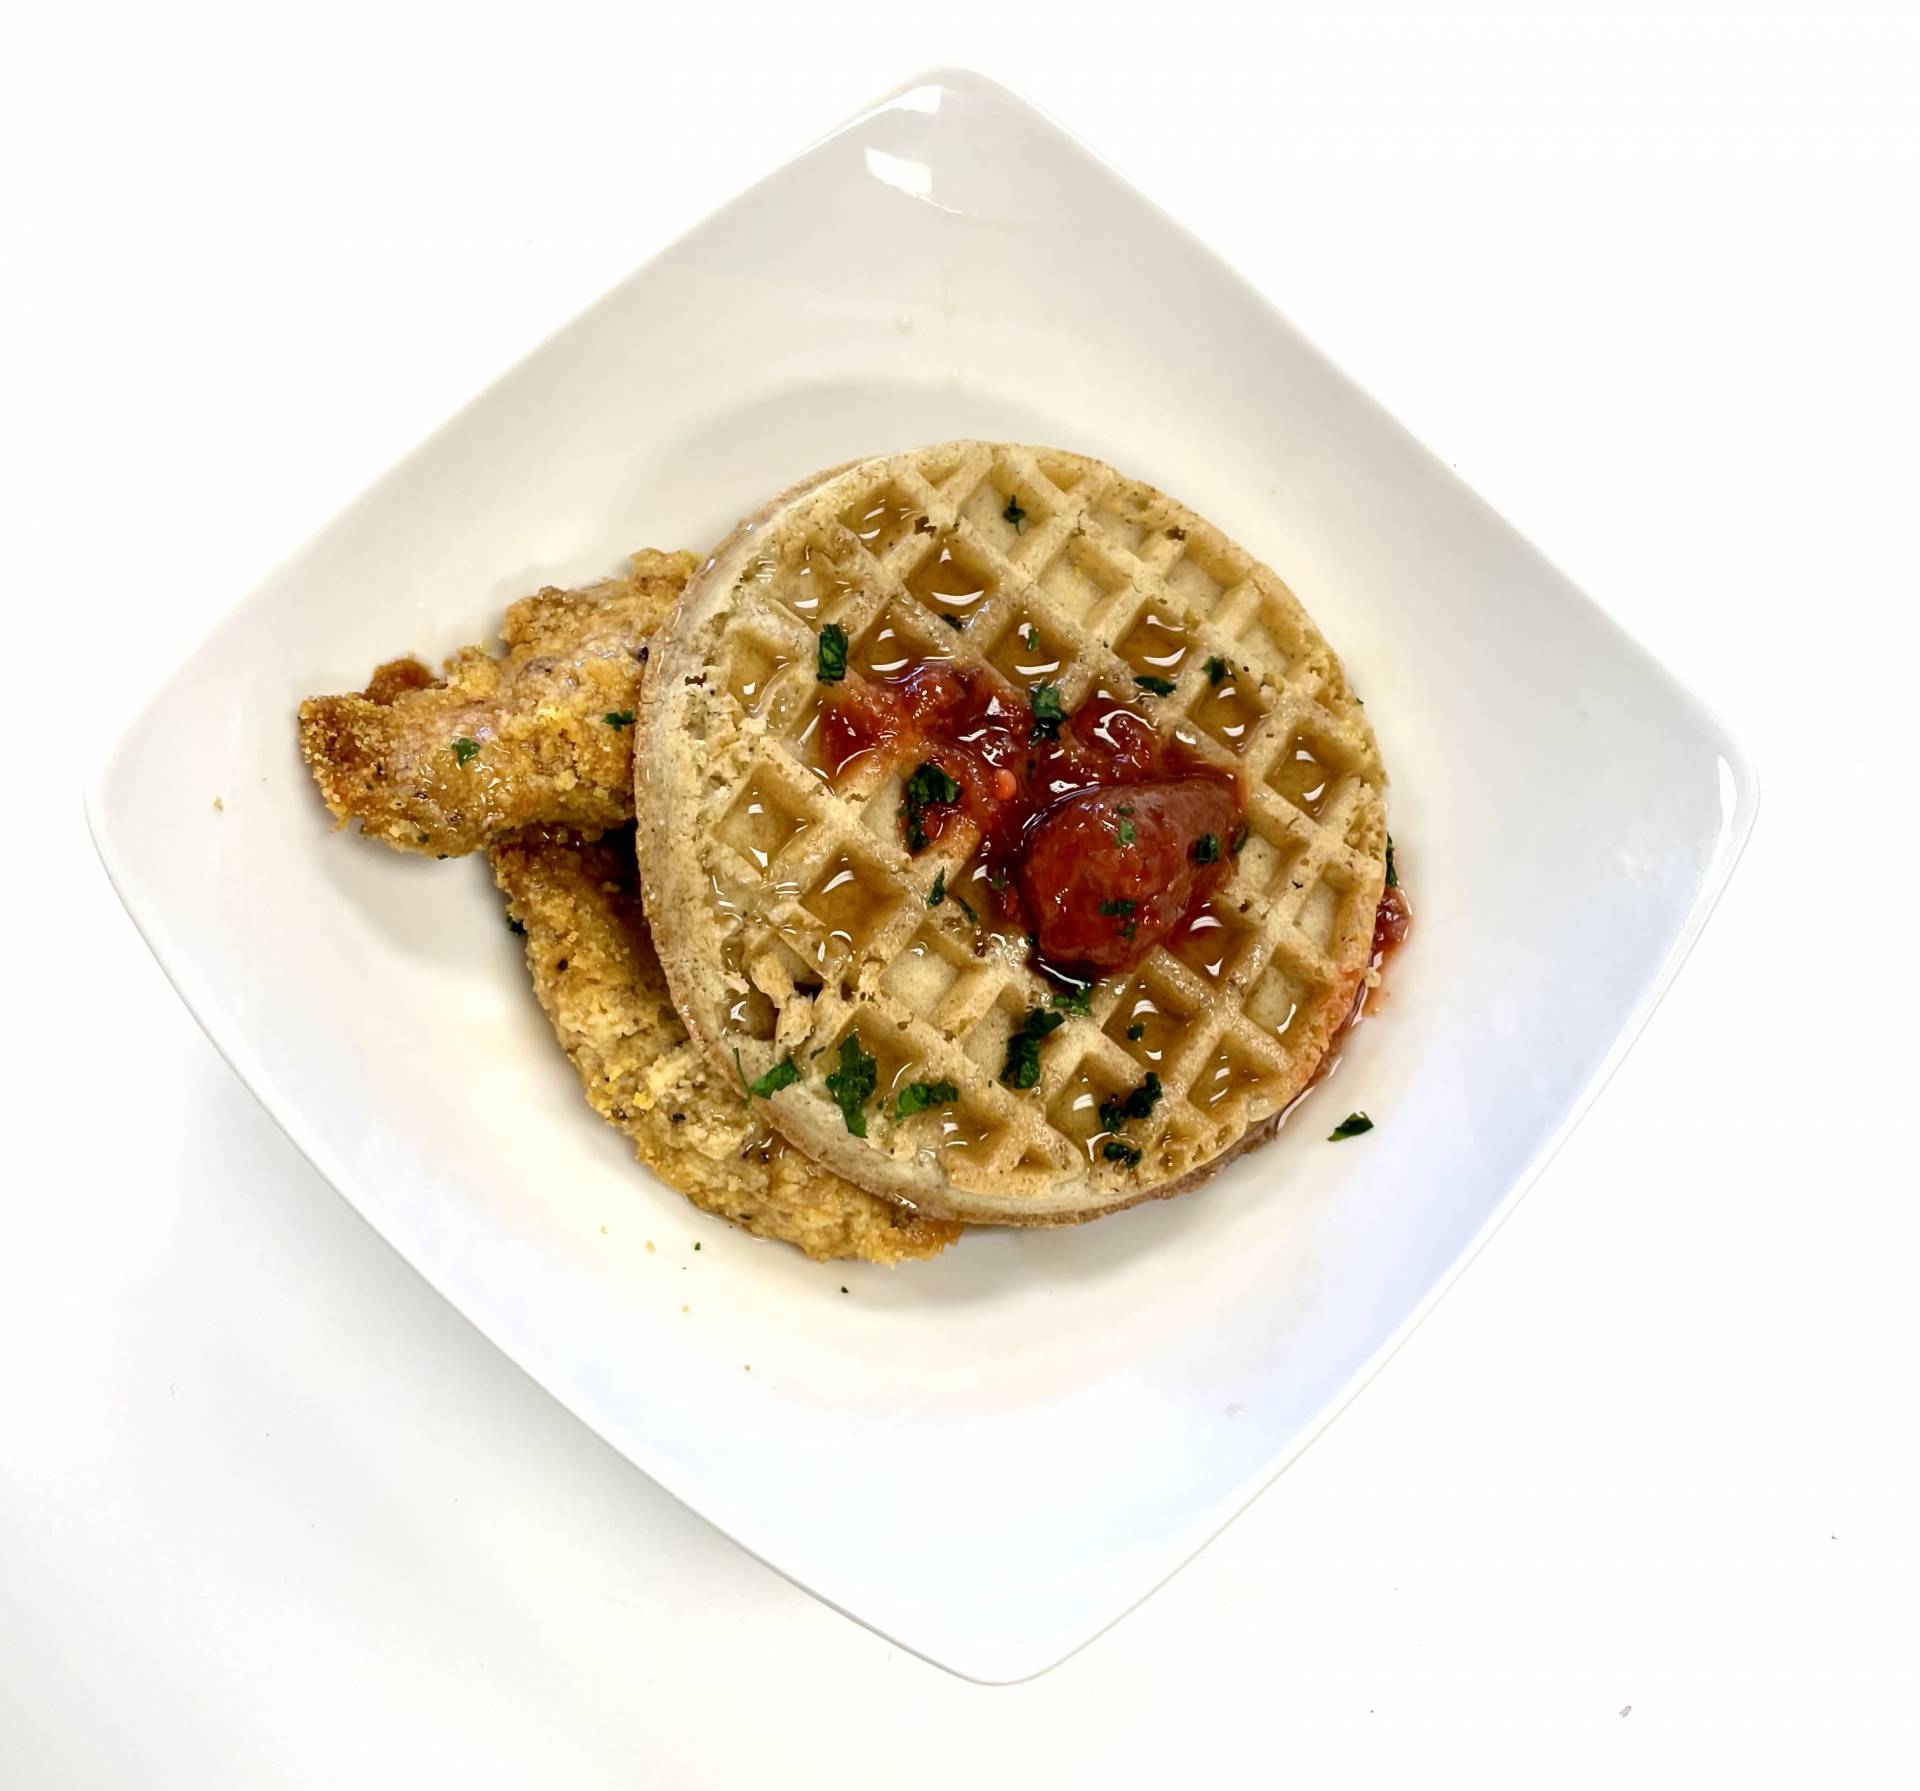 Chicken and Waffles with a Strawberry Glaze - Keto